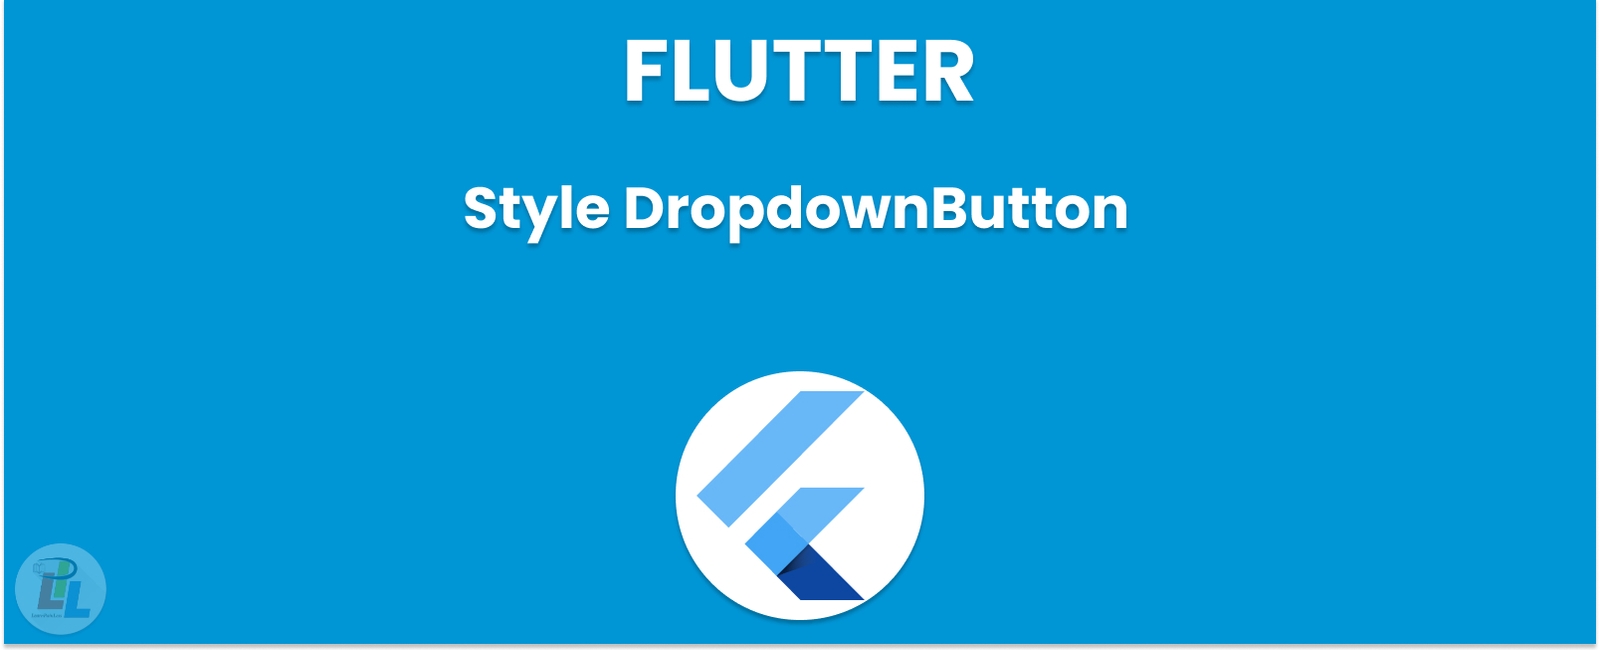 How to Style DropdownButton in Flutter